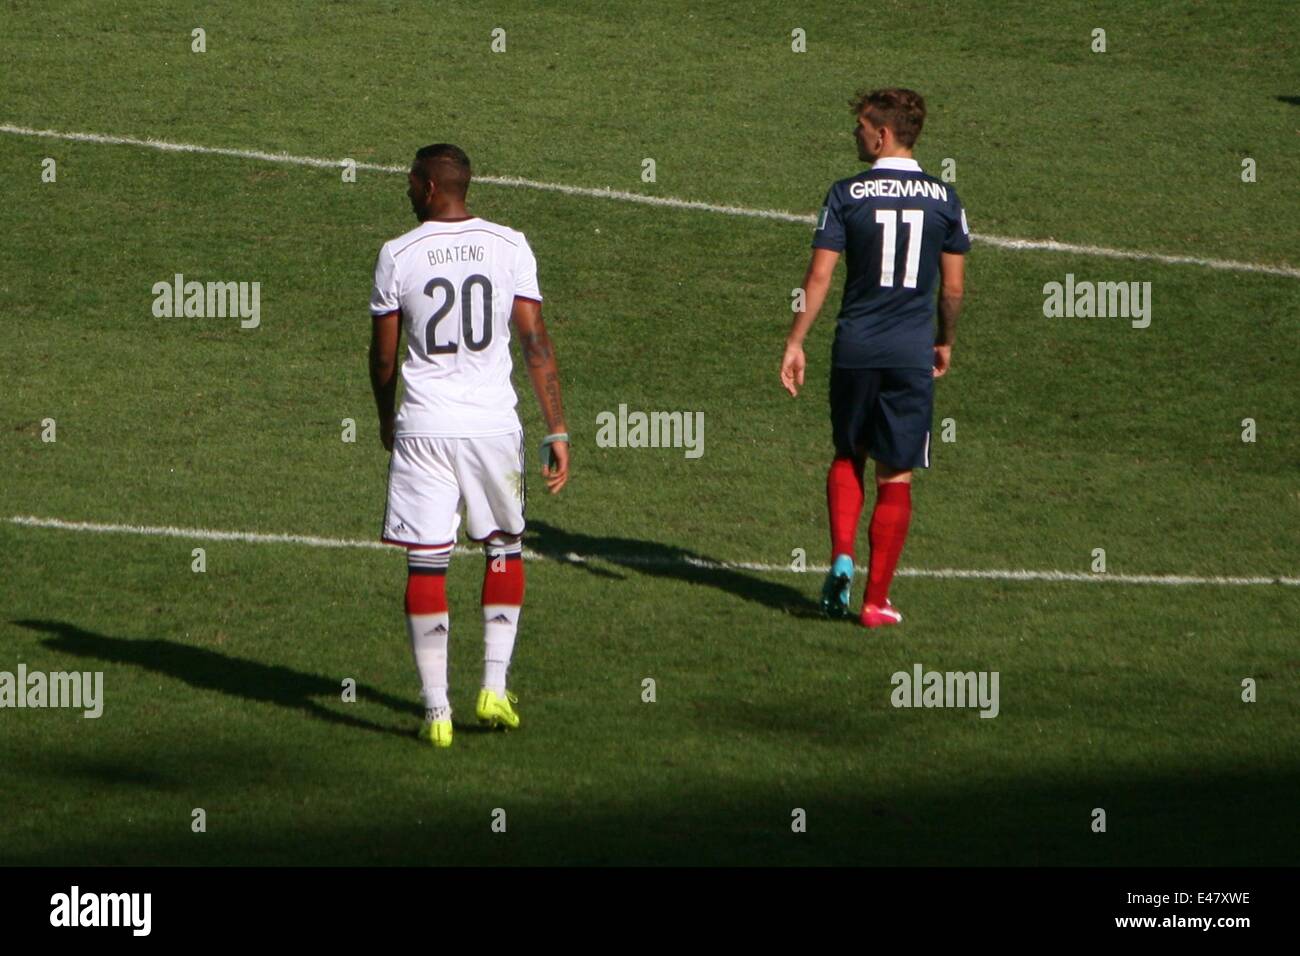 Rio de Janeiro, Brazil. 04th July, 2014. 2014 FIFA World Cup Brazil. Jérôme Boateng (GER) and Antoine Griezmann (FRA) in the quarterfinals match France 0-1 Germany. Rio de Janeiro, Brazil, 4th July, 2014. Credit:  Maria Adelaide Silva/Alamy Live News Stock Photo